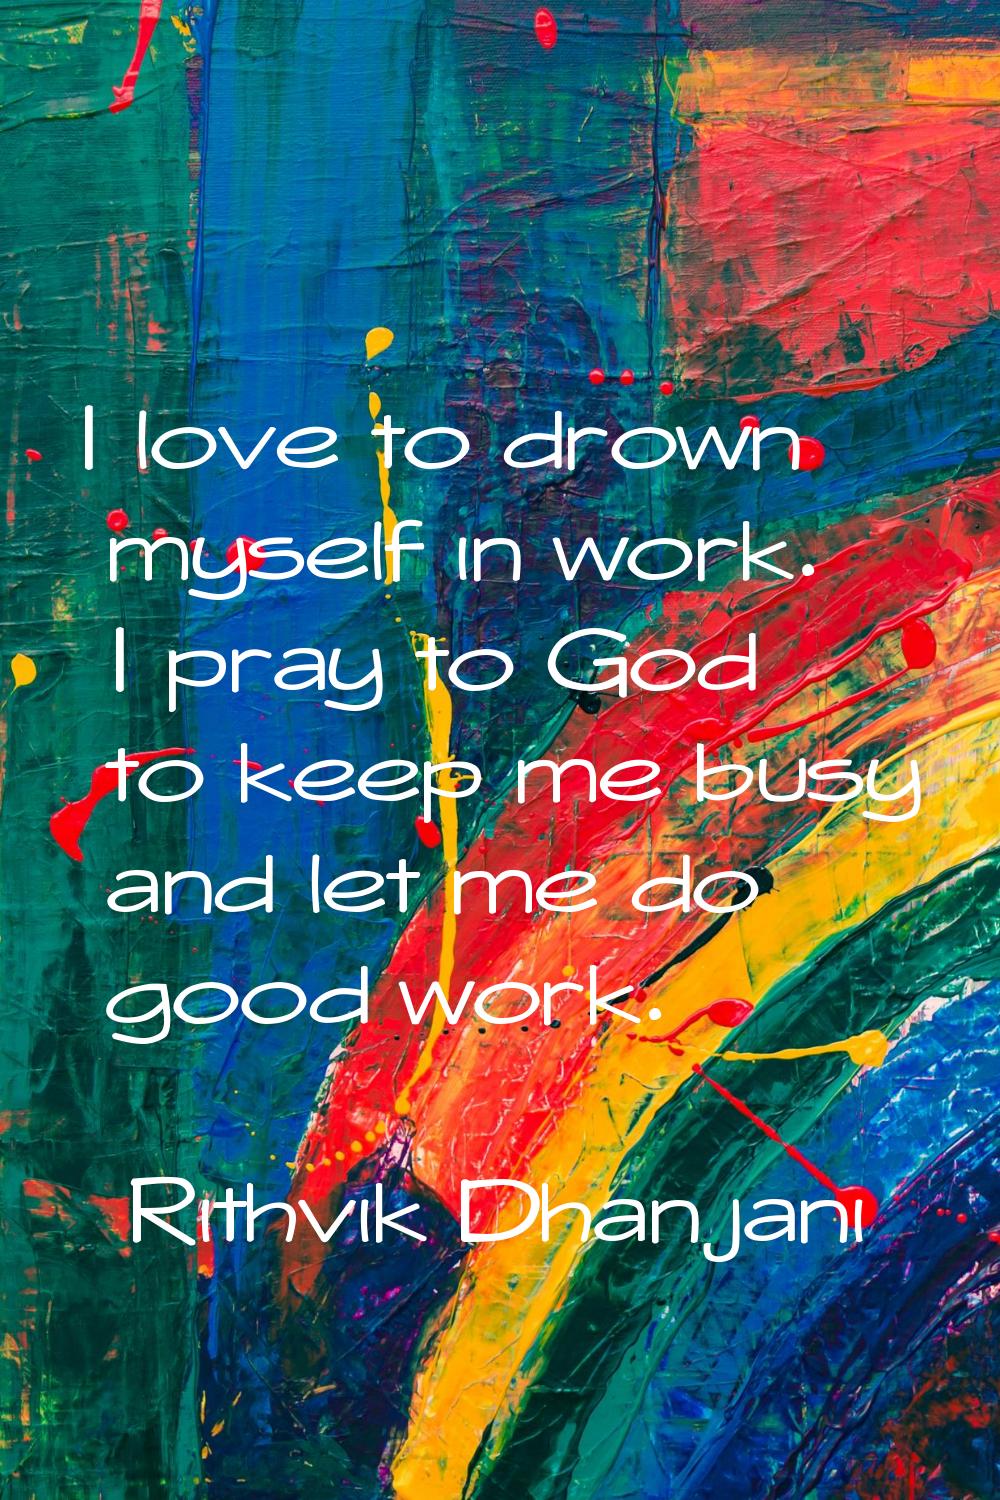 I love to drown myself in work. I pray to God to keep me busy and let me do good work.